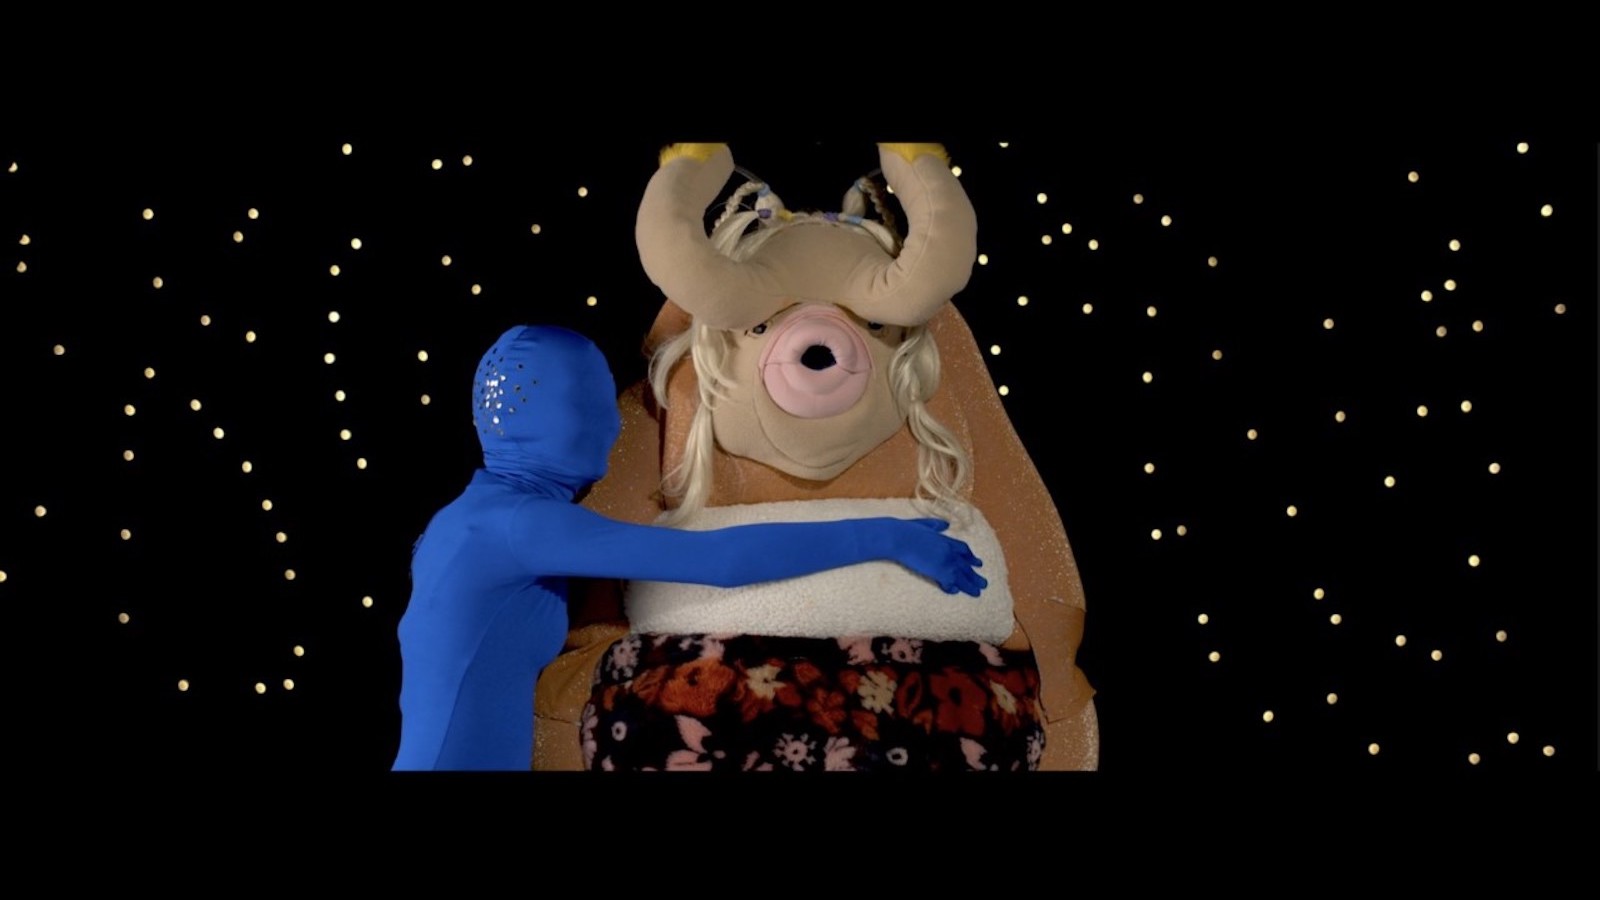 A figure wrapped entirely in blue head, including their head, wraps its arms around a large puppet-like creature with horns and an open mouth facing camera, with a sea of stars behind them